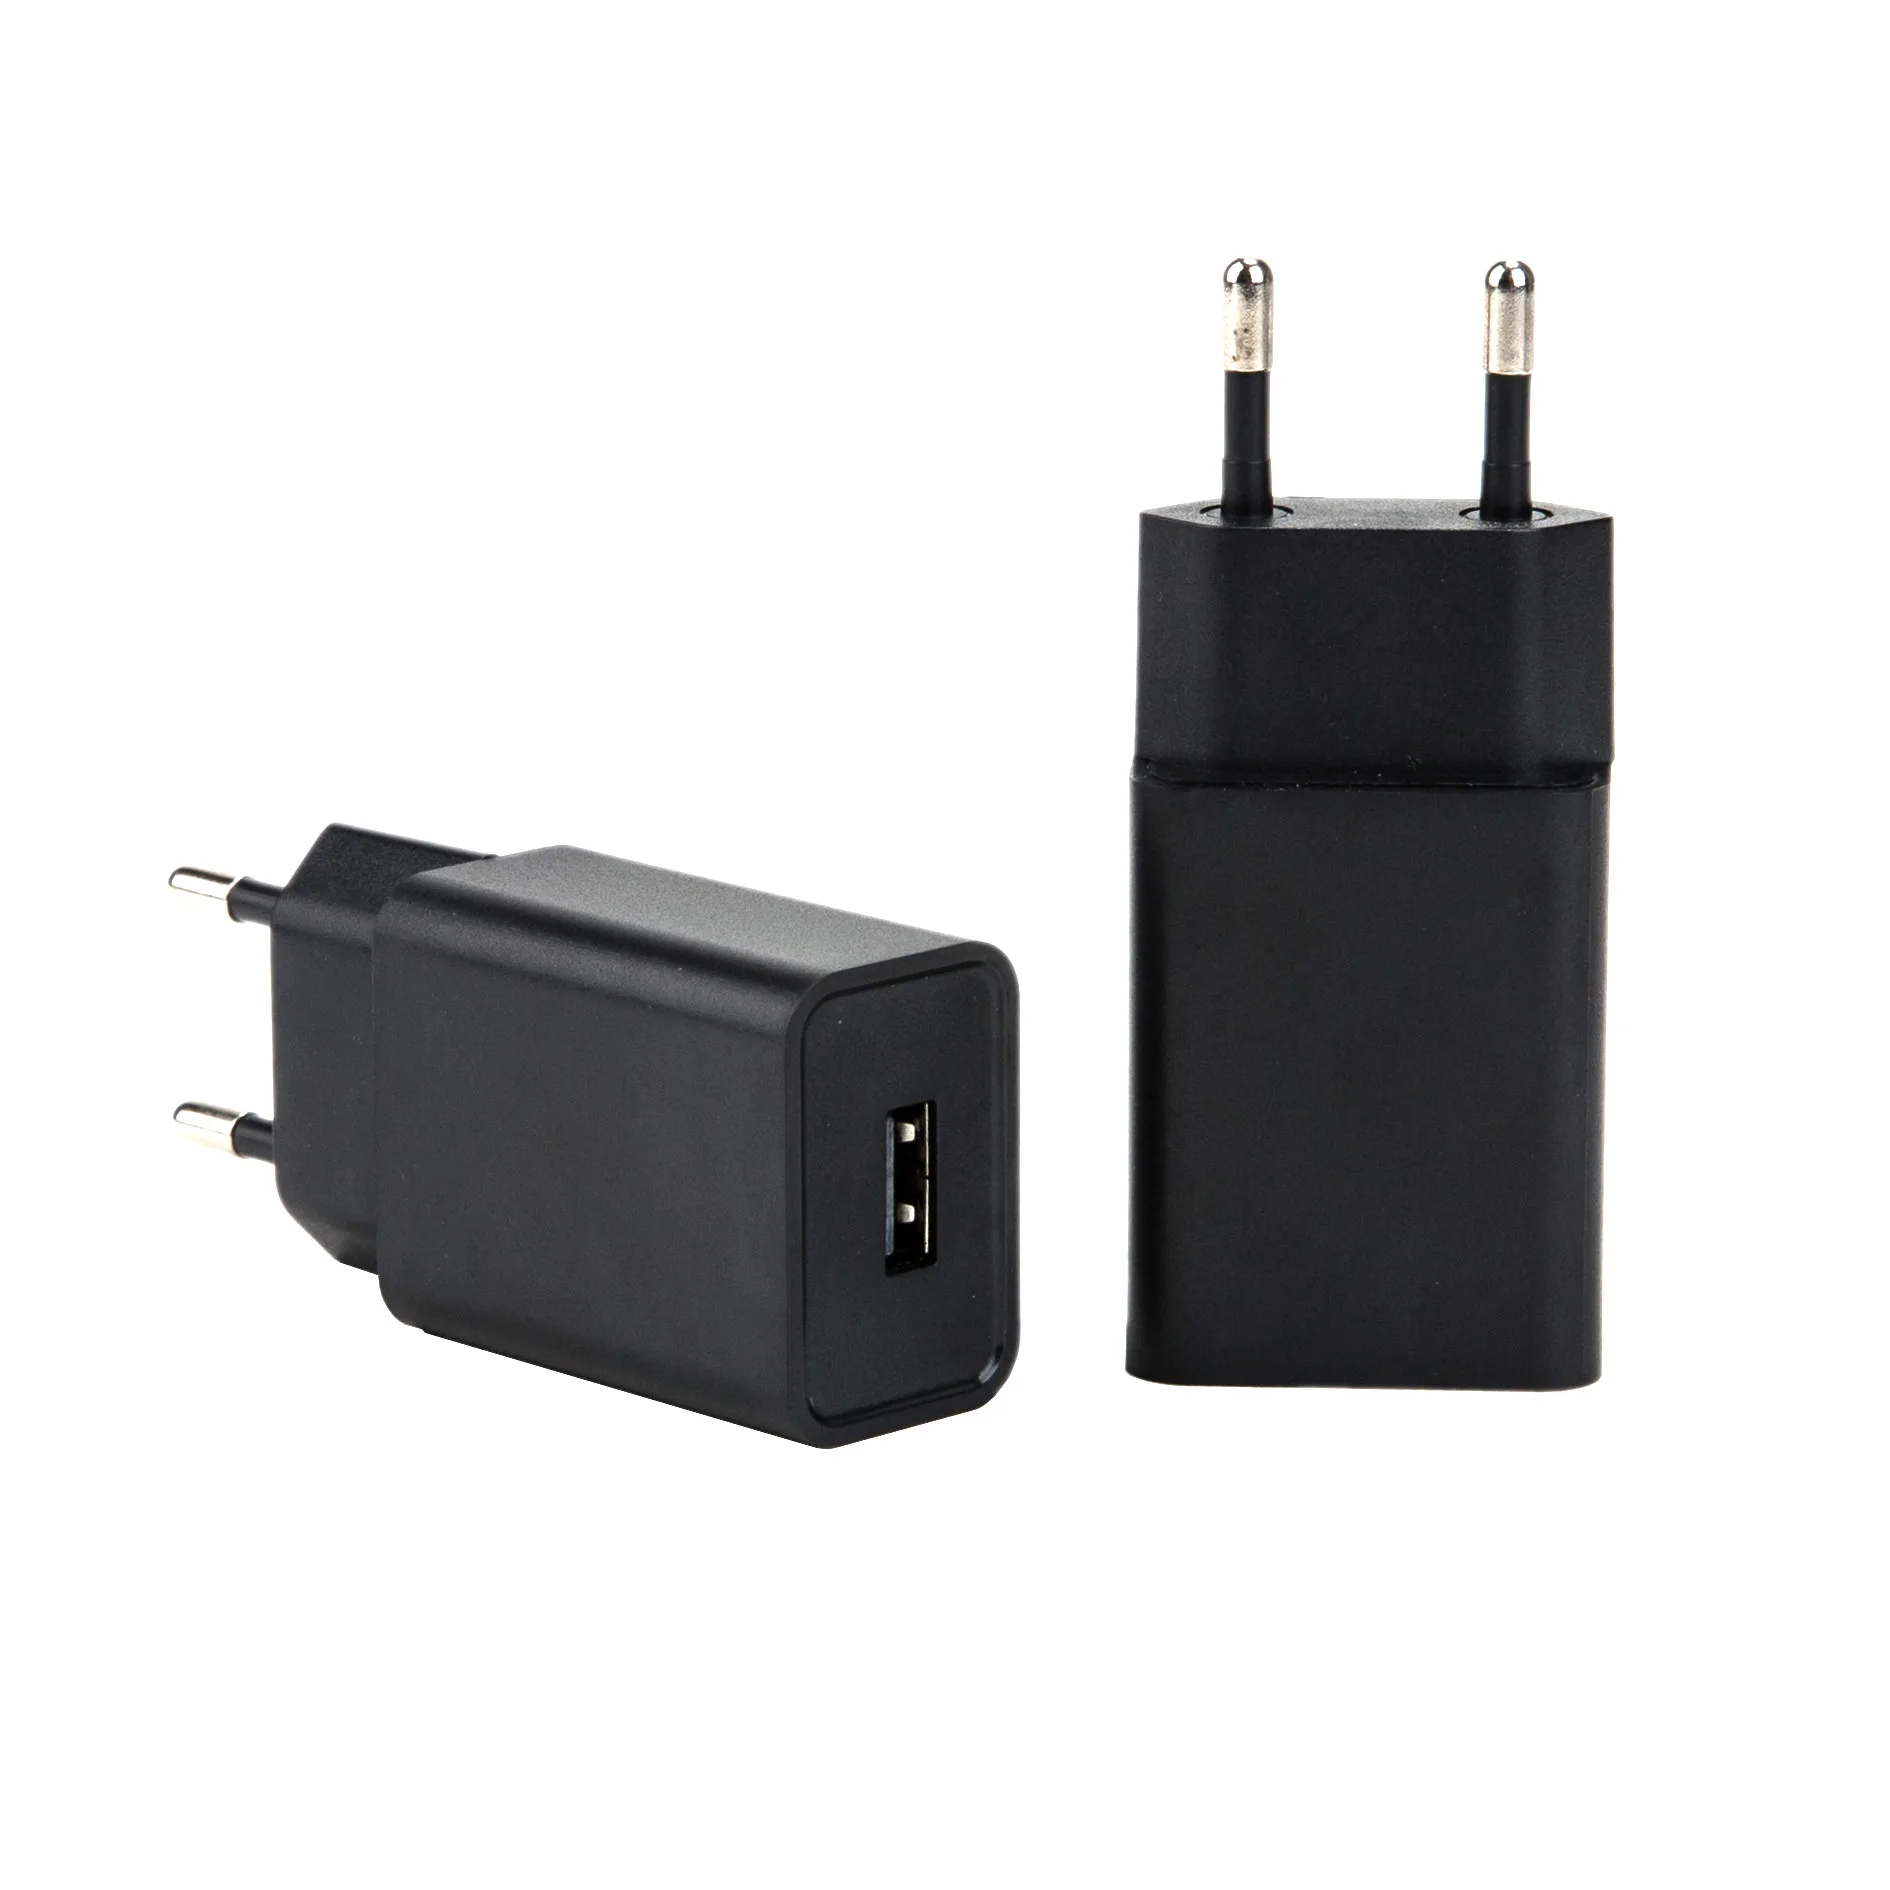 Mobile Charger EU Plug USB For Phone Adapter Wall Quick Charge mobile phone chargers Аксессуары для мобильных